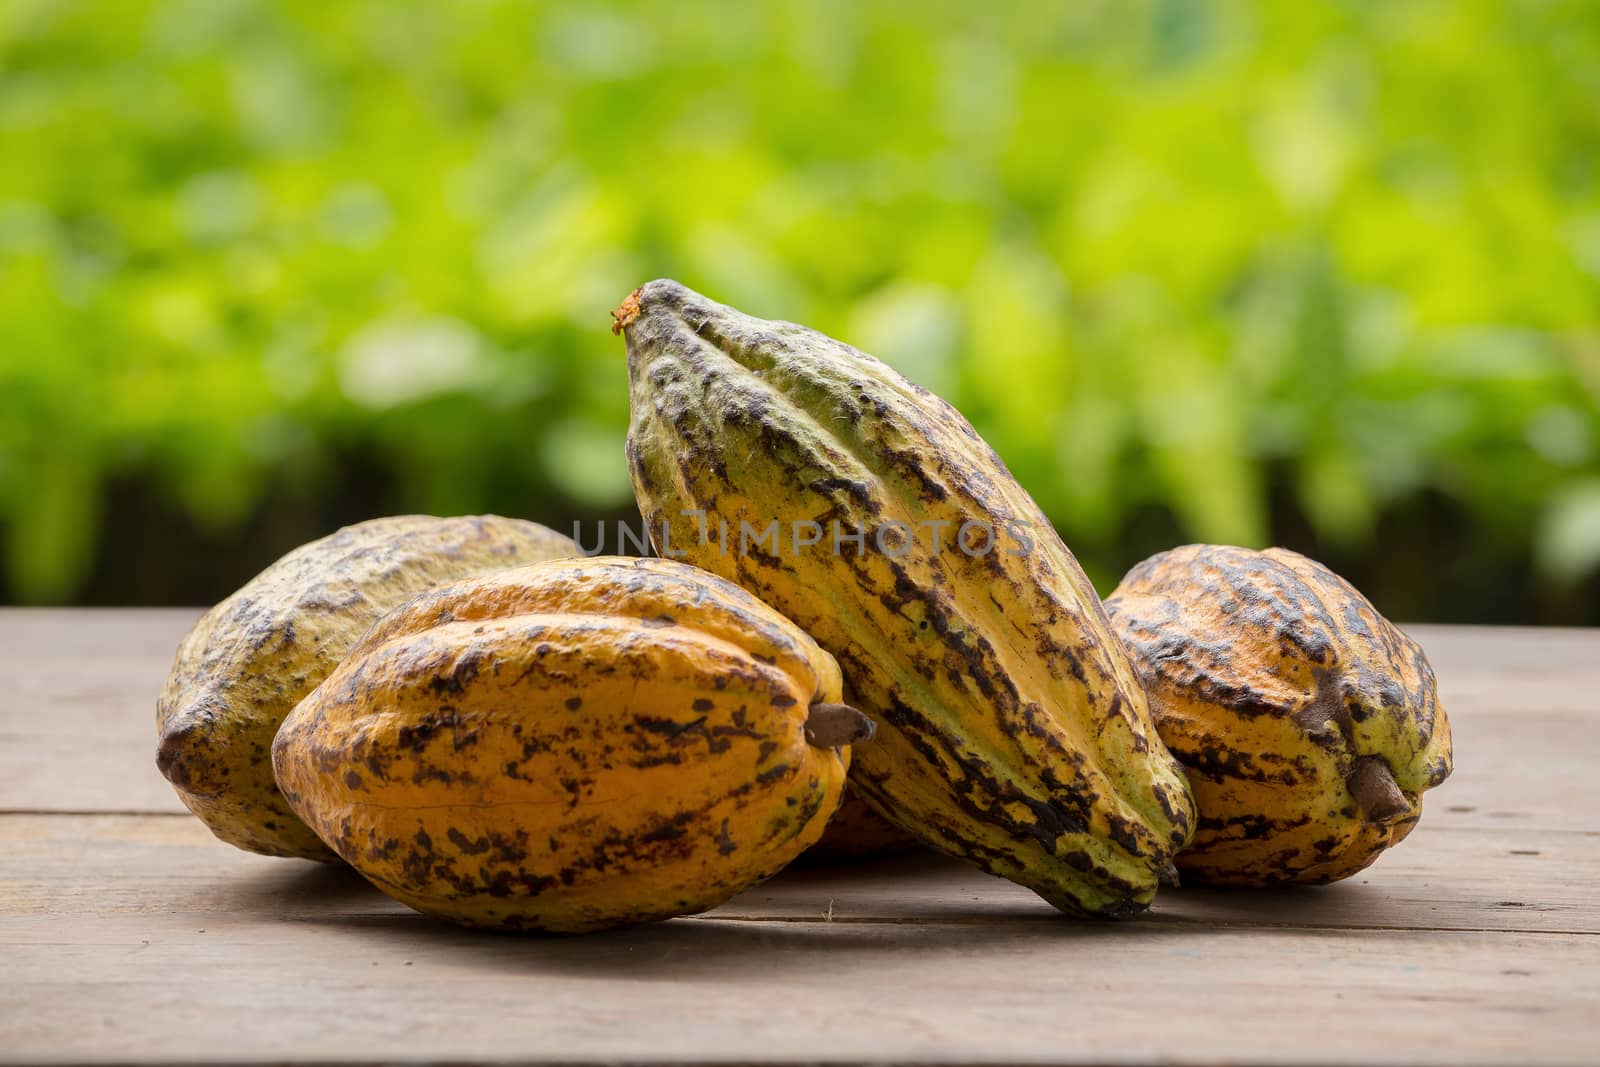 Raw Cocoa beans and cocoa pod on a wooden surface by kaiskynet